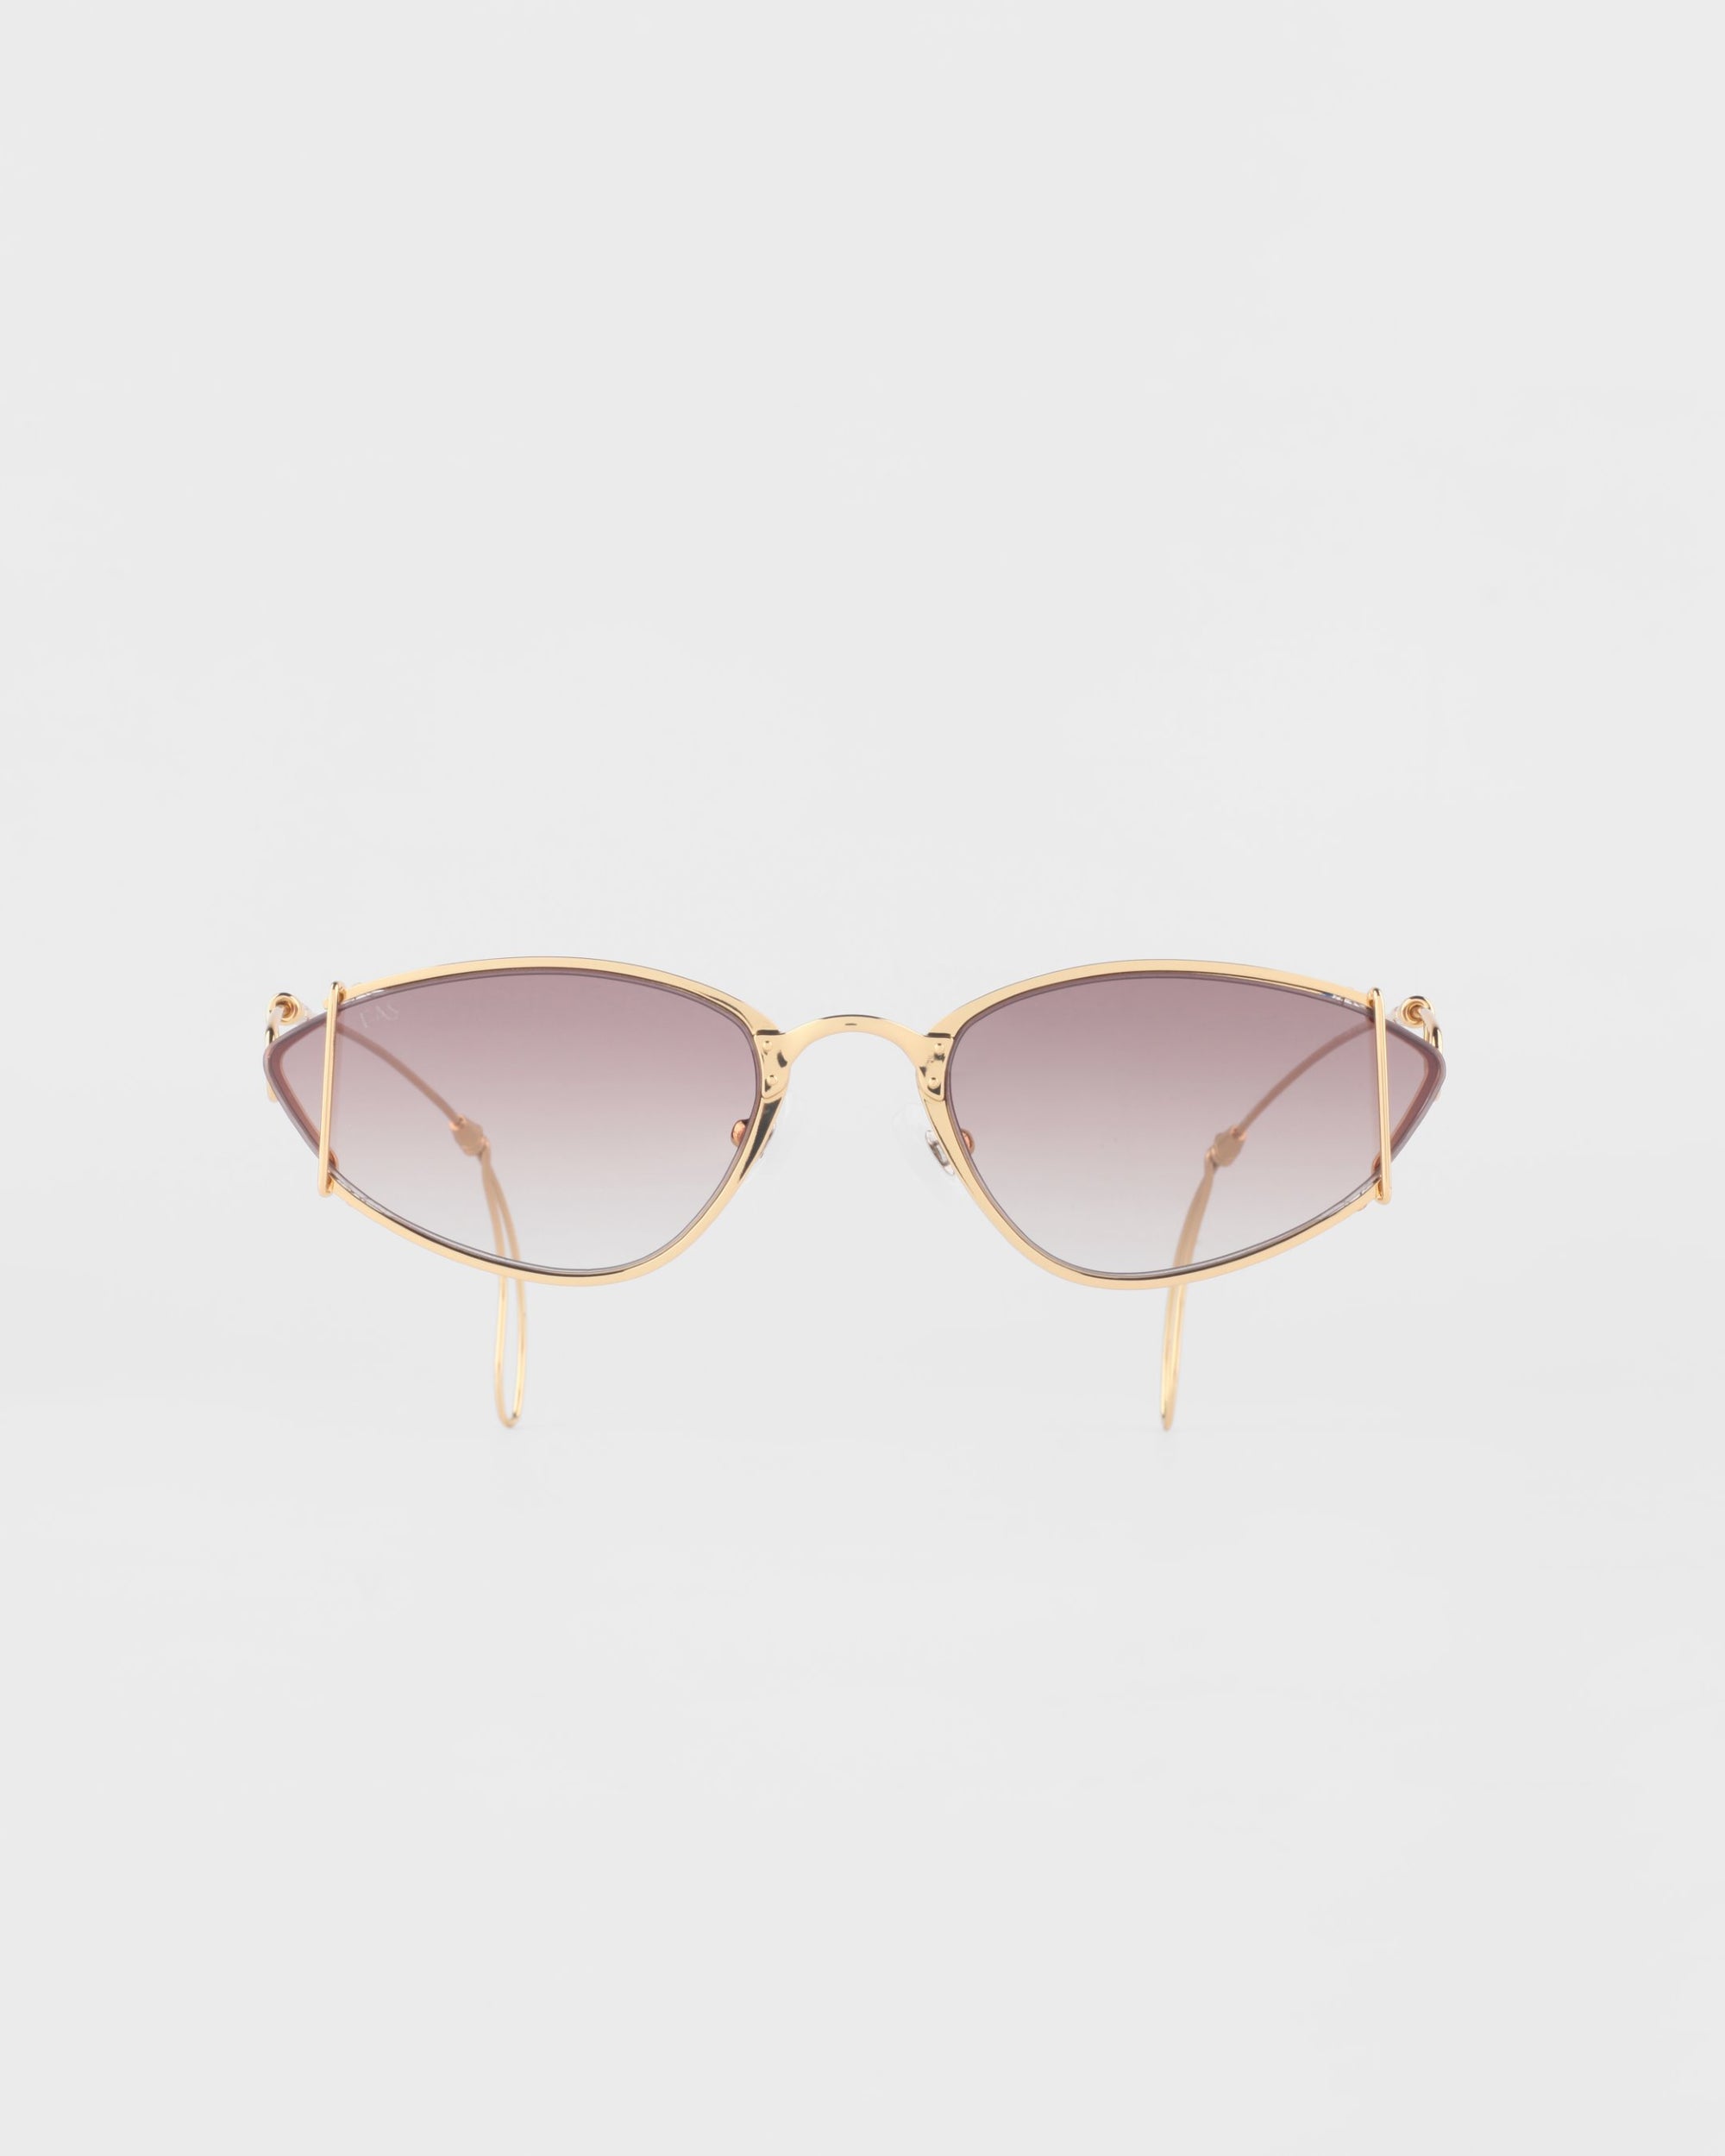 A pair of stylish For Art's Sake® Ornate sunglasses with 18-karat gold-plated frames and tinted lenses shown against a plain white background. The sunglasses have a sleek, modern design with slightly angular cat-eye shaped lenses, thin curved arms, and an anti-reflective coating for optimal clarity.